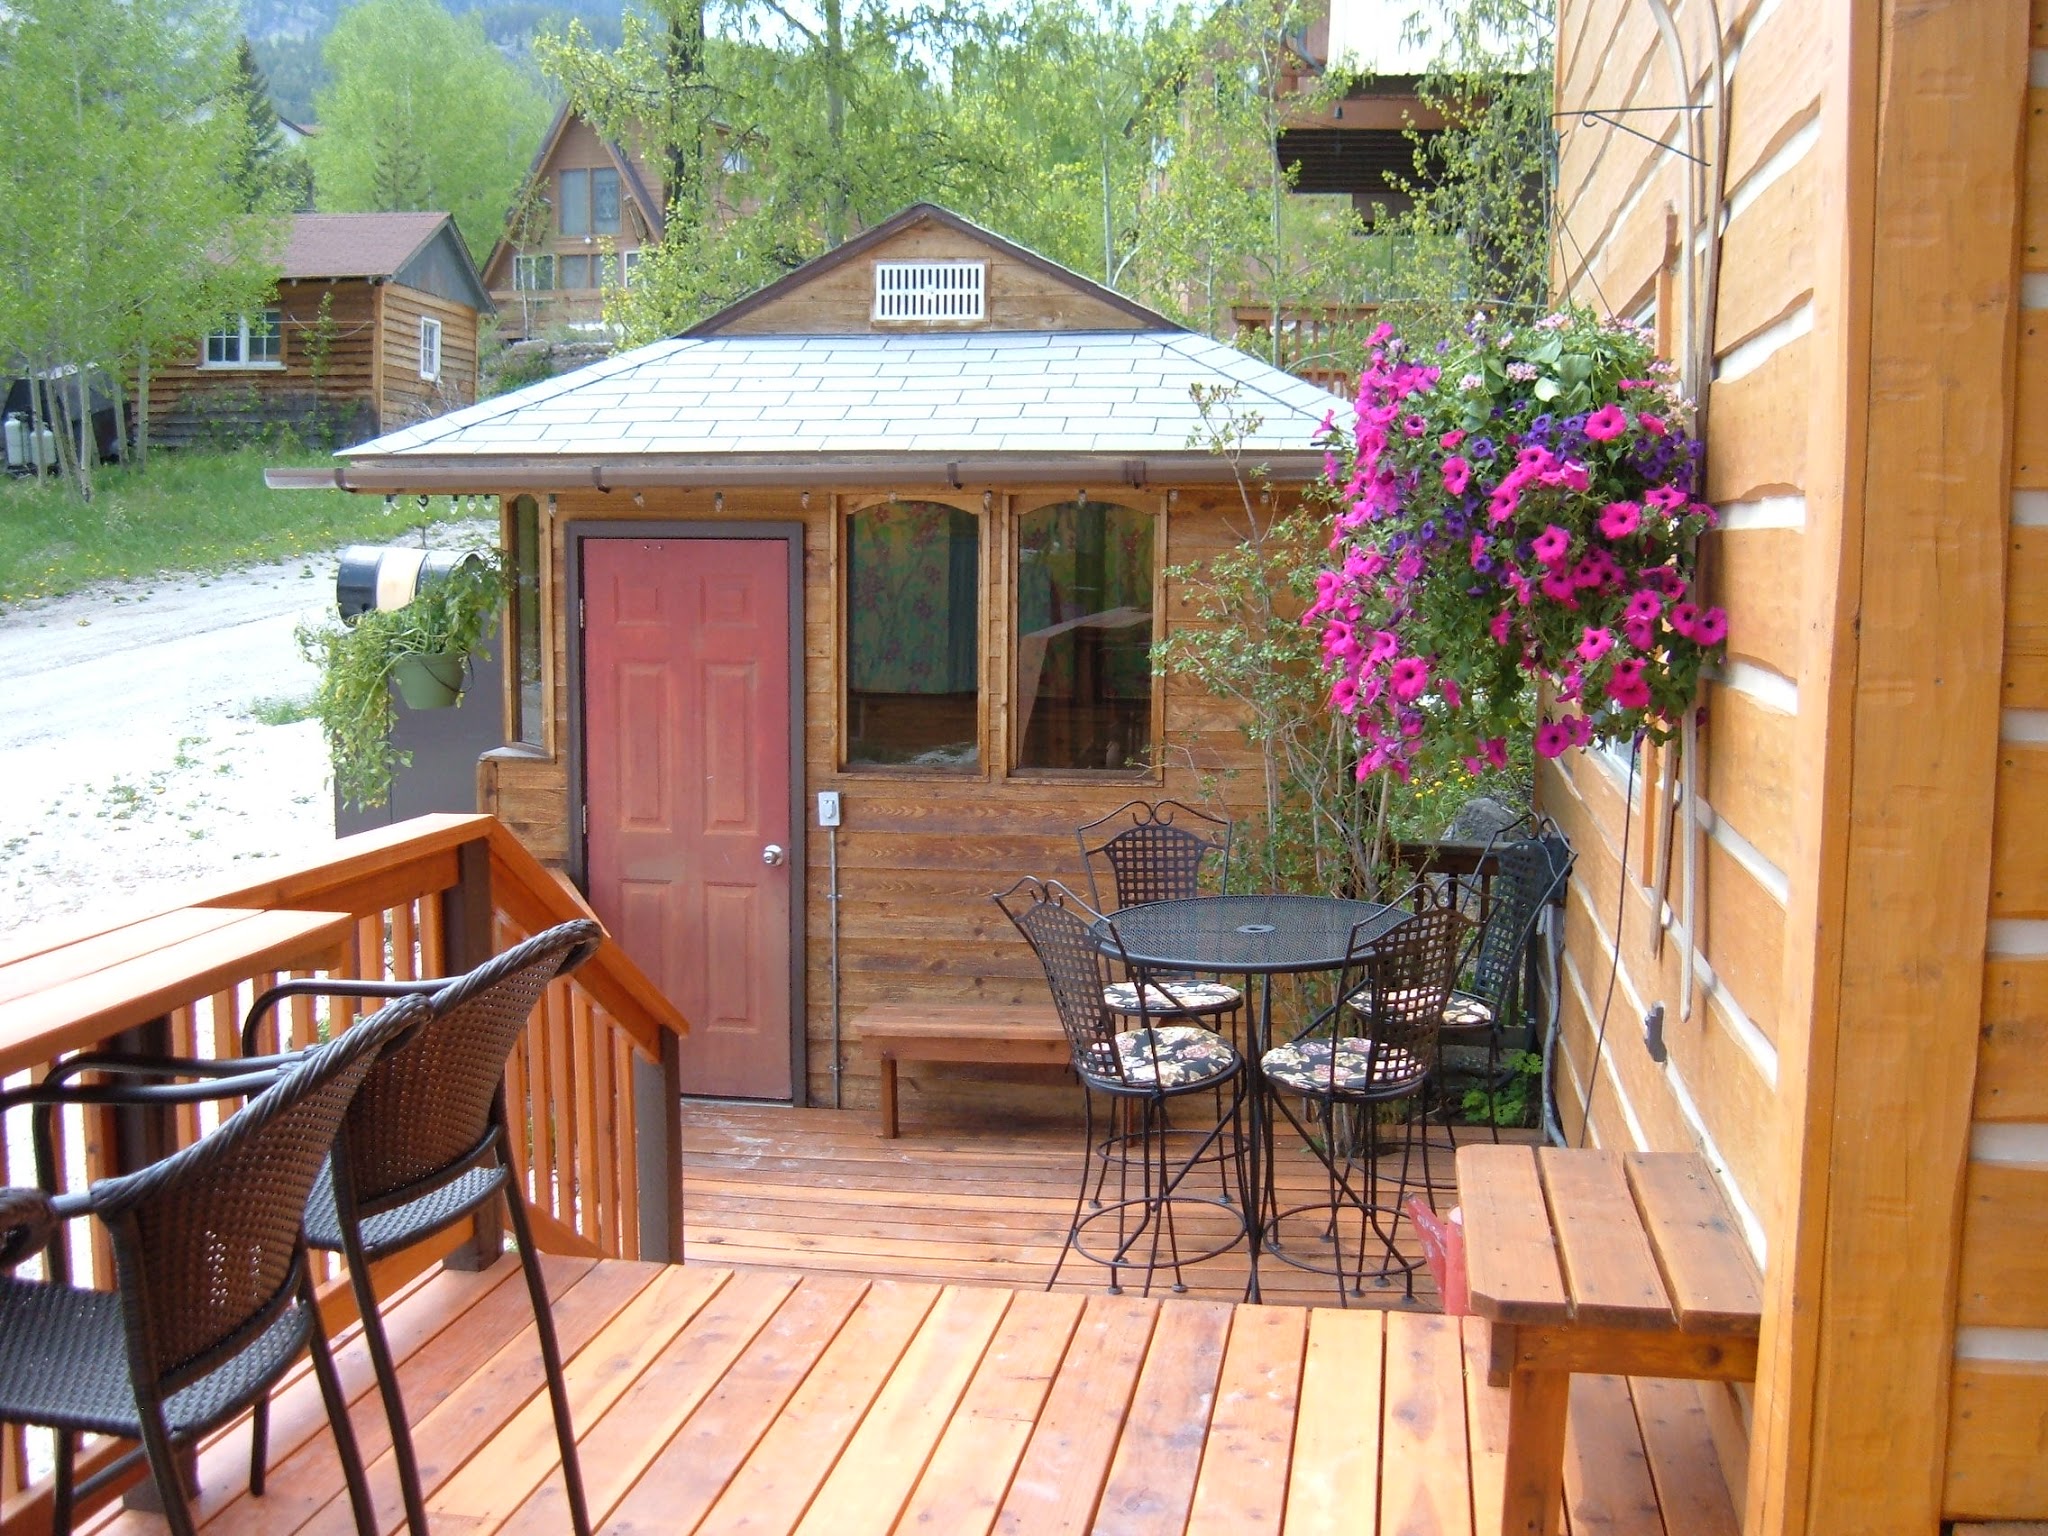 Wooded deck with large hanging pot of pink and purple flowers; both attached to the log sided condos with antique skis behind the the hanging flower pots.